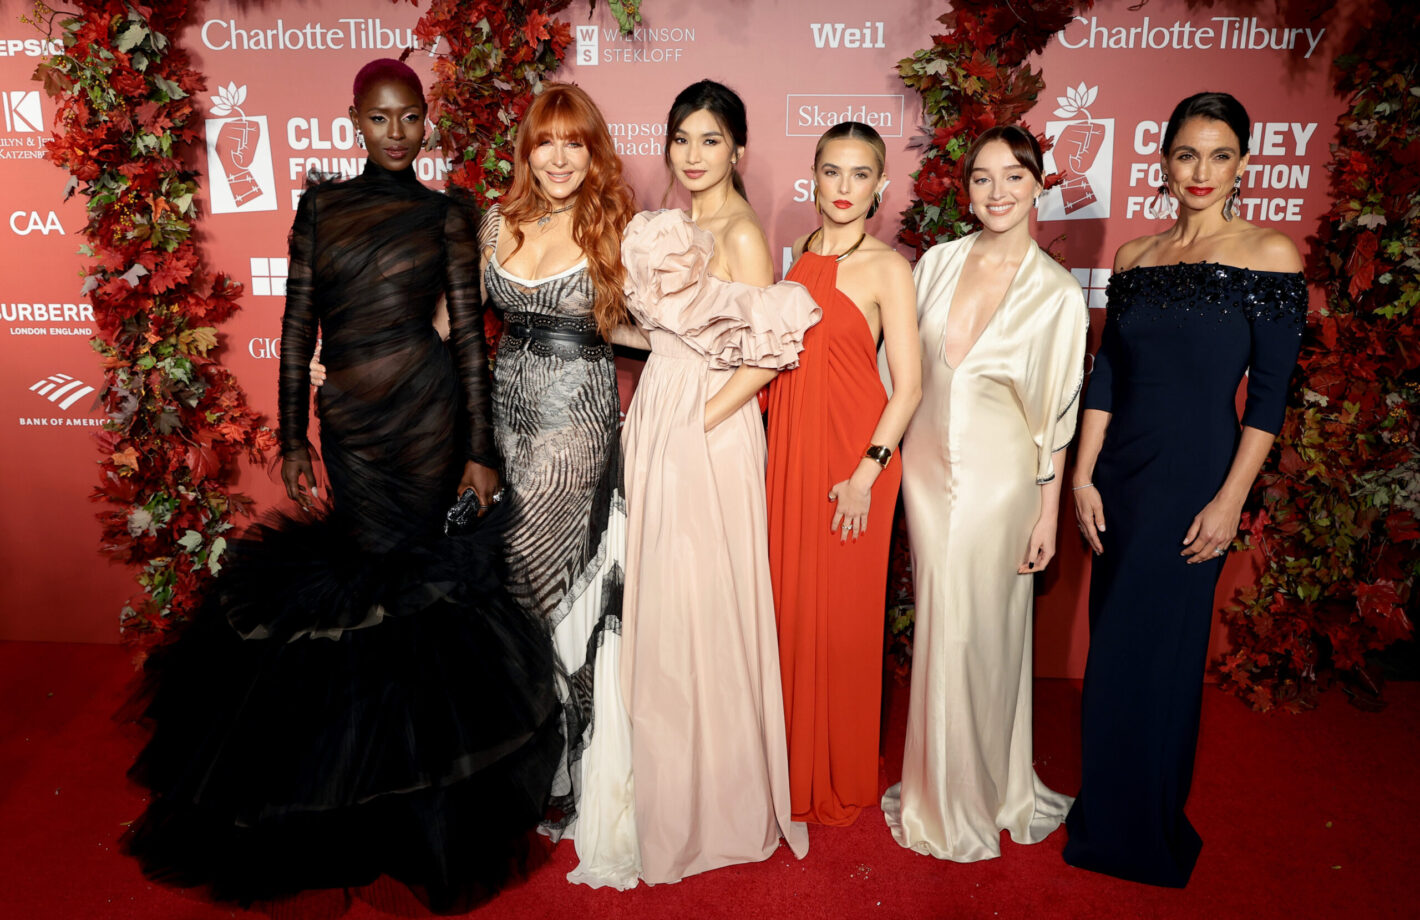 Jodie Turner-Smith, Charlotte Tilbury, Gemma Chan, Zoey Deutch, Phoebe Dynevor and Demetra Pinsent attend the Clooney Foundation For Justice Inaugural Albie Awards